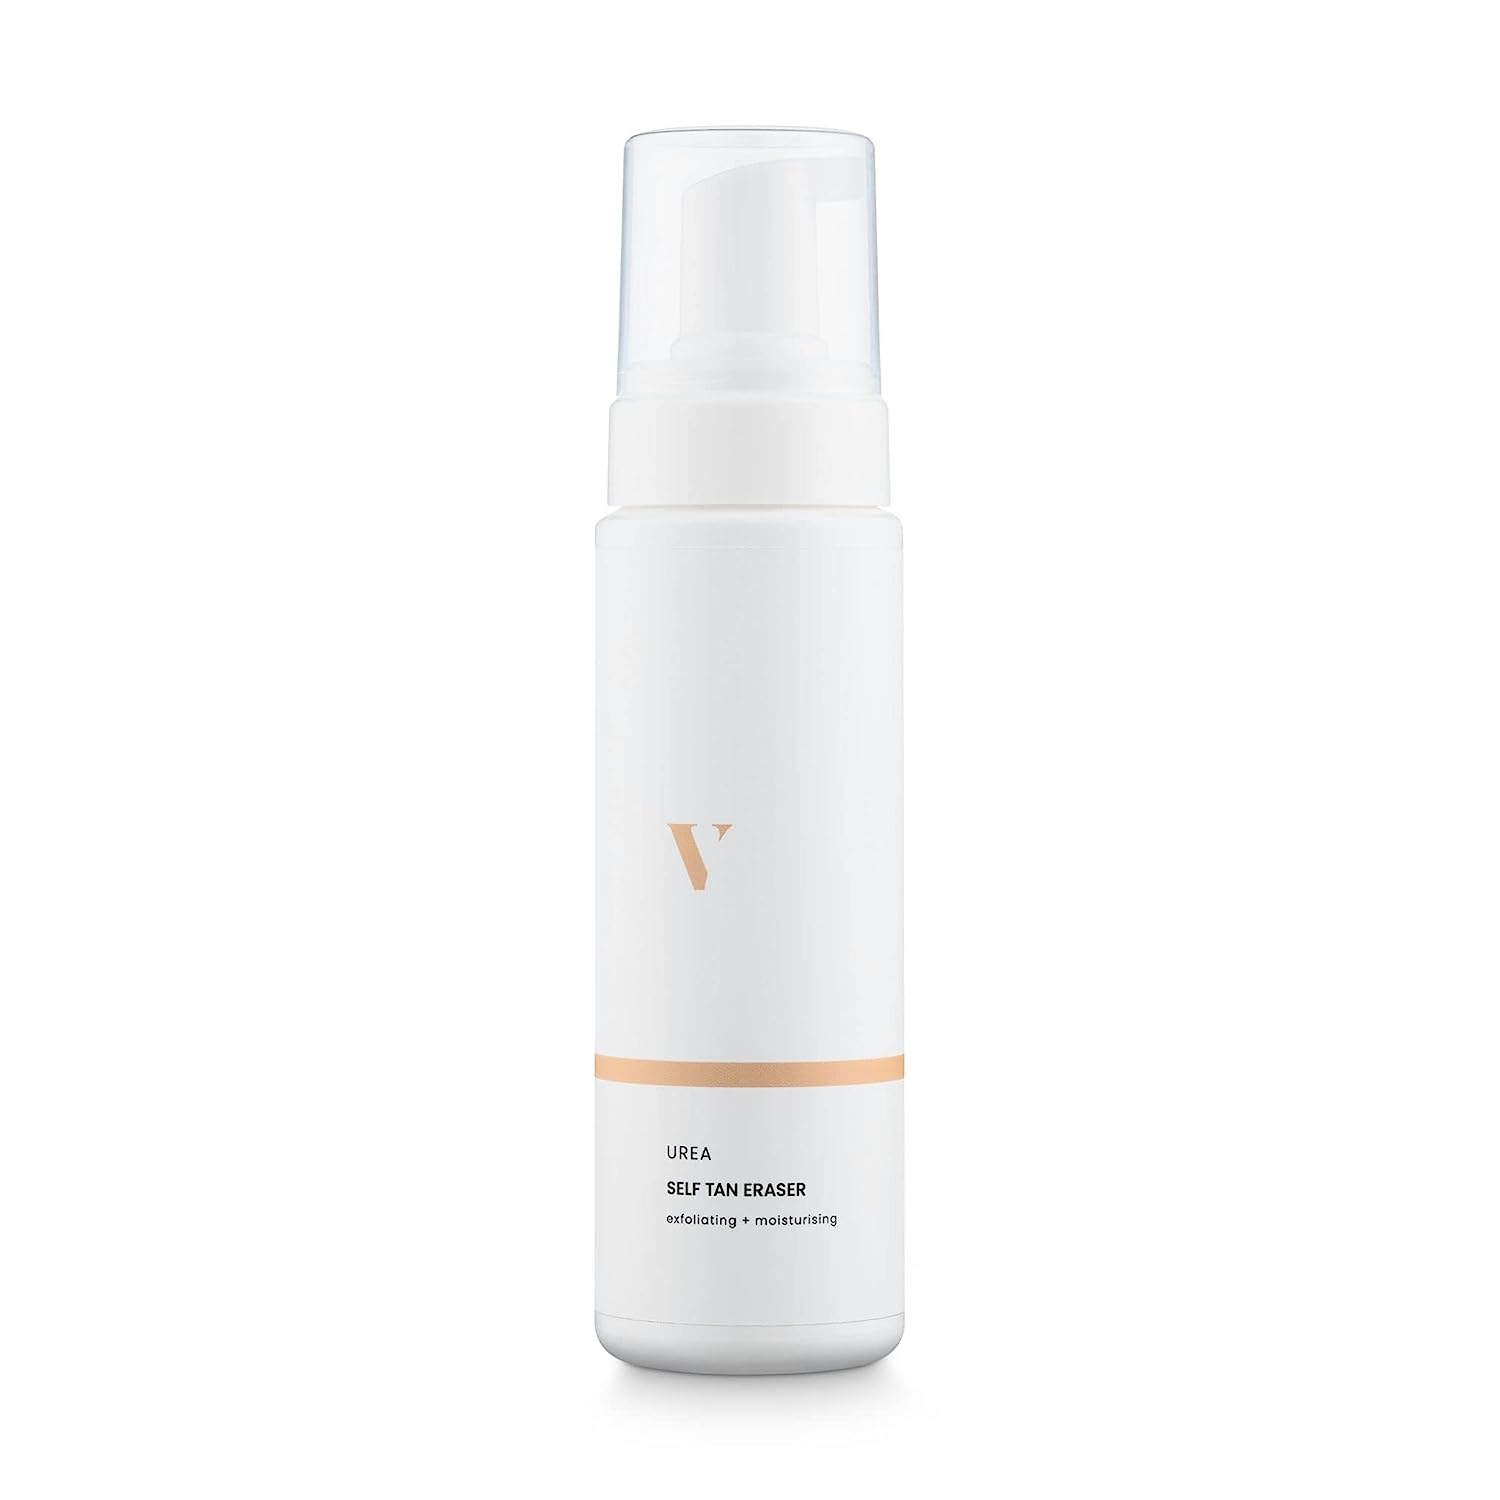 Venicebody Urea Self Tan Eraser (200 ml) - Nourishing Self -Tanning Remover, Quick and Easy, with Urea, Dermatologicalally Tested